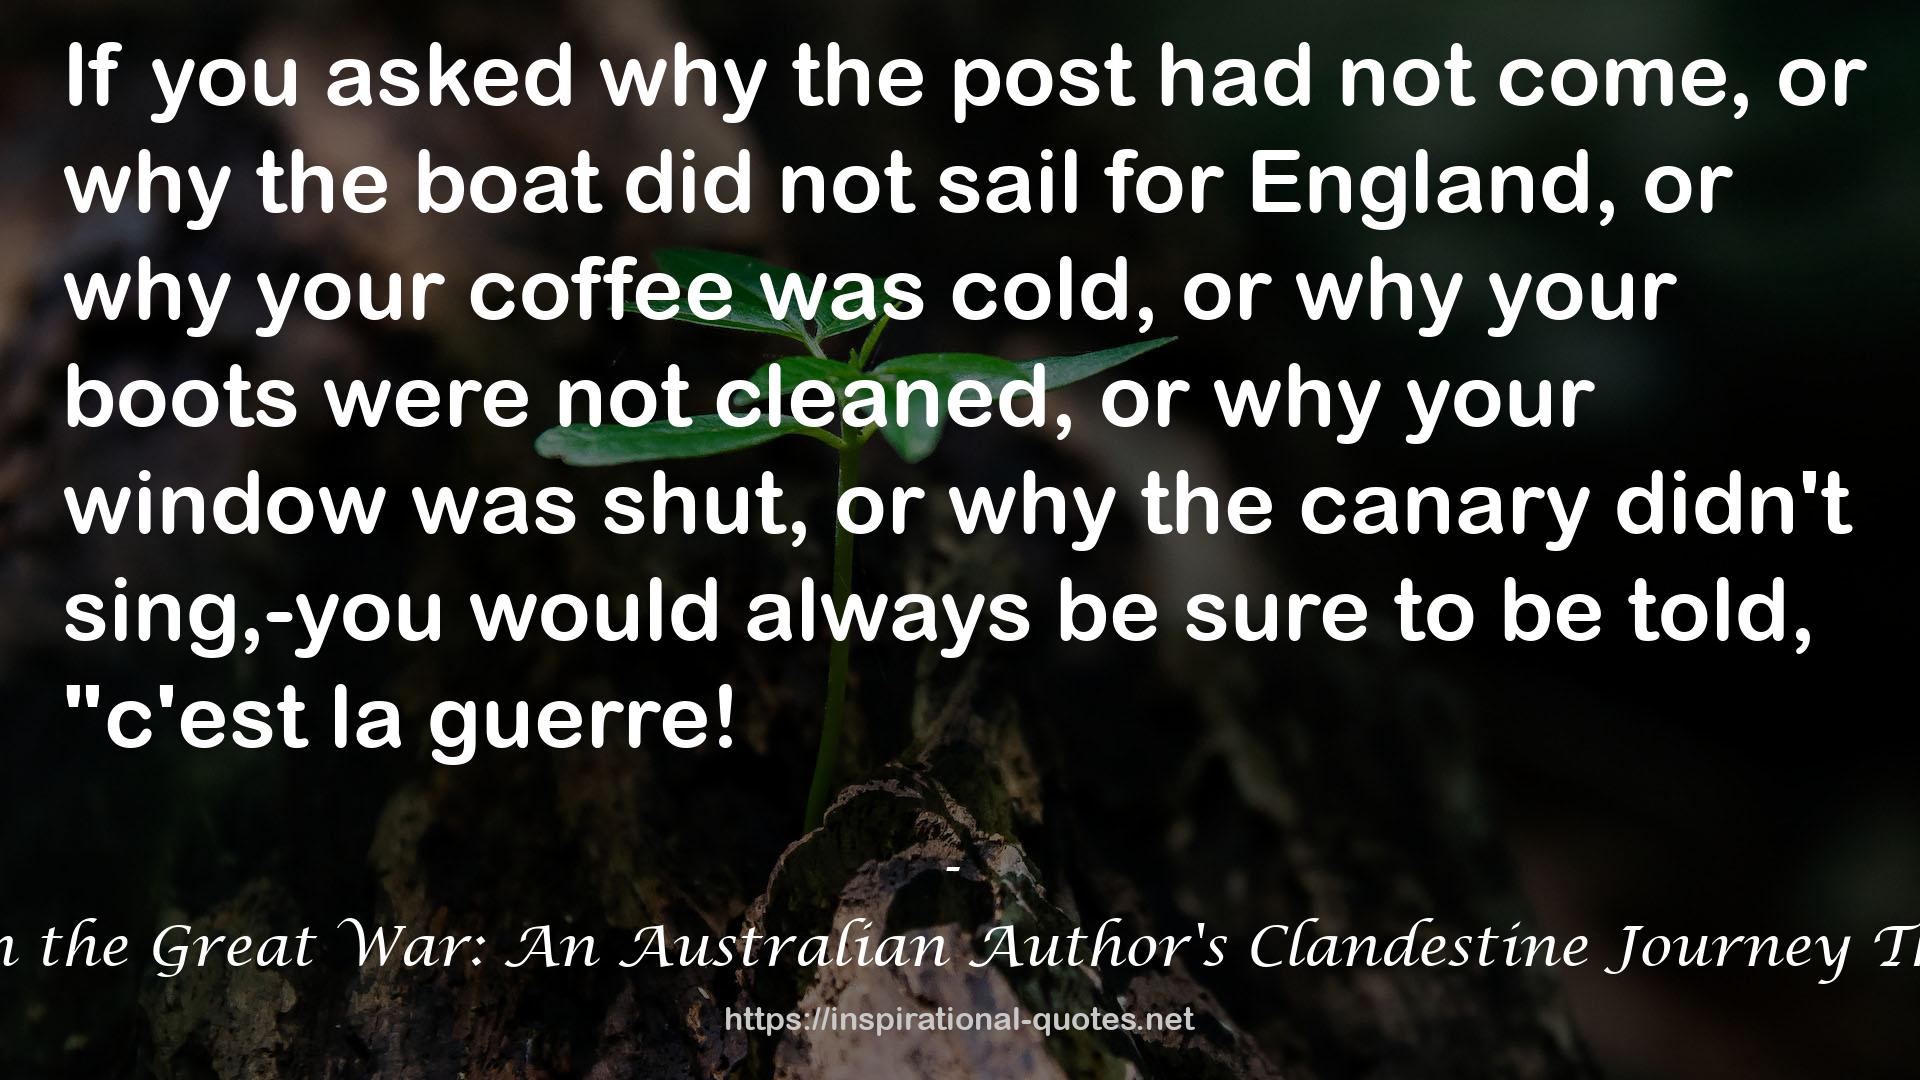 A Woman's Experiences in the Great War: An Australian Author's Clandestine Journey Through War-Torn Belgium QUOTES